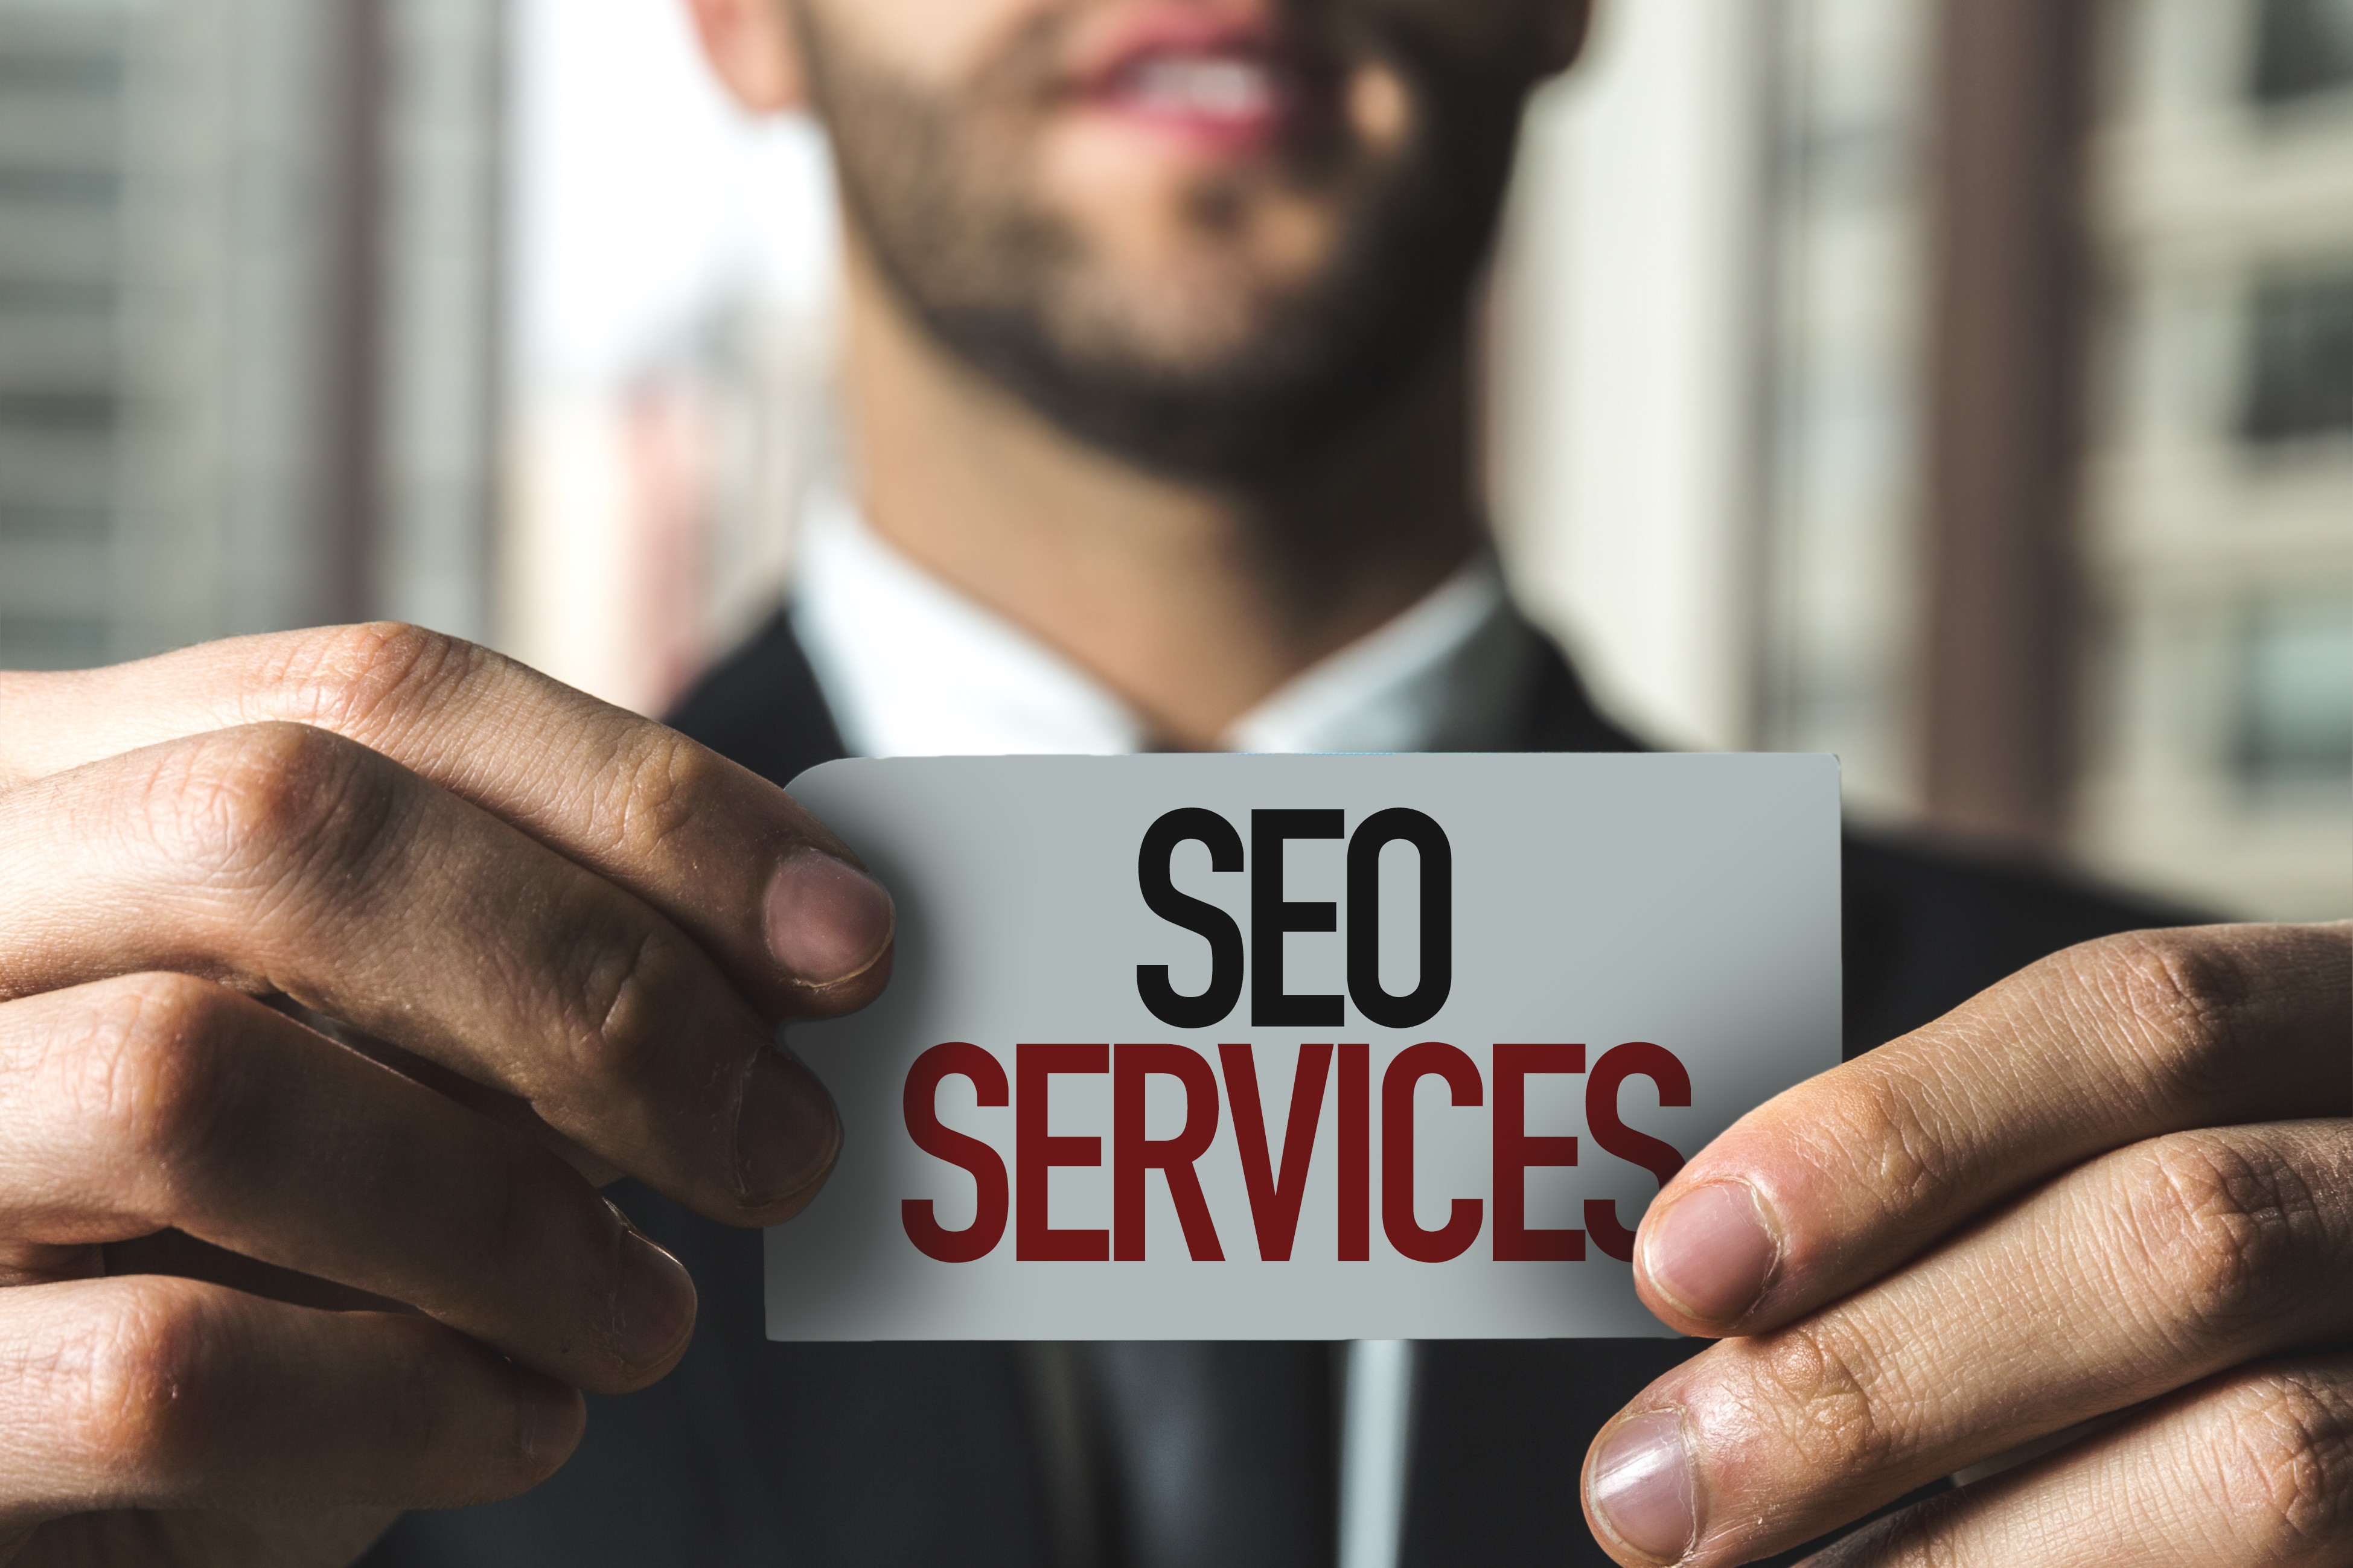 seo specialist offering services